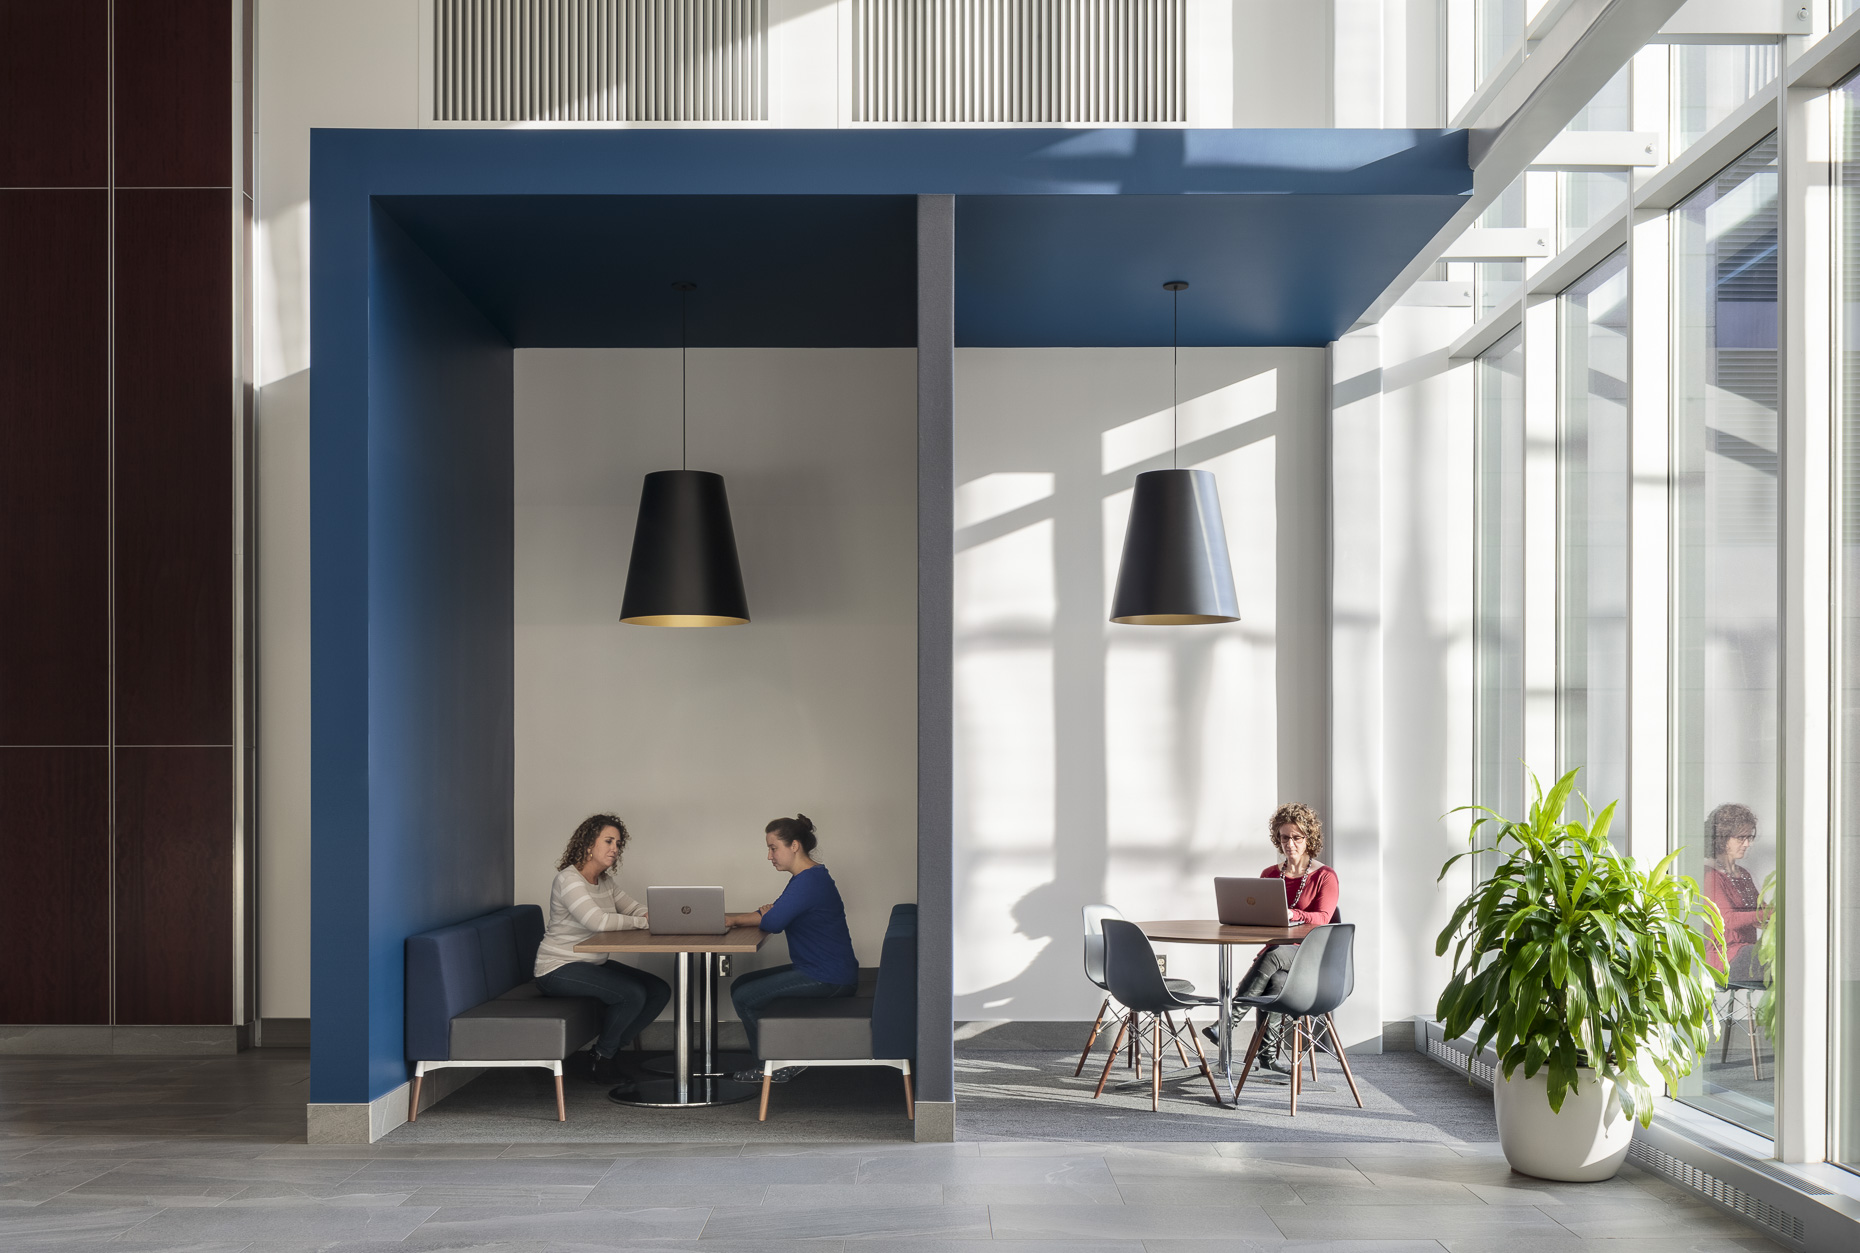 Nationwide HUB by BHDP Architecture photographed by Lauren K Davis based in Columbus, Ohio